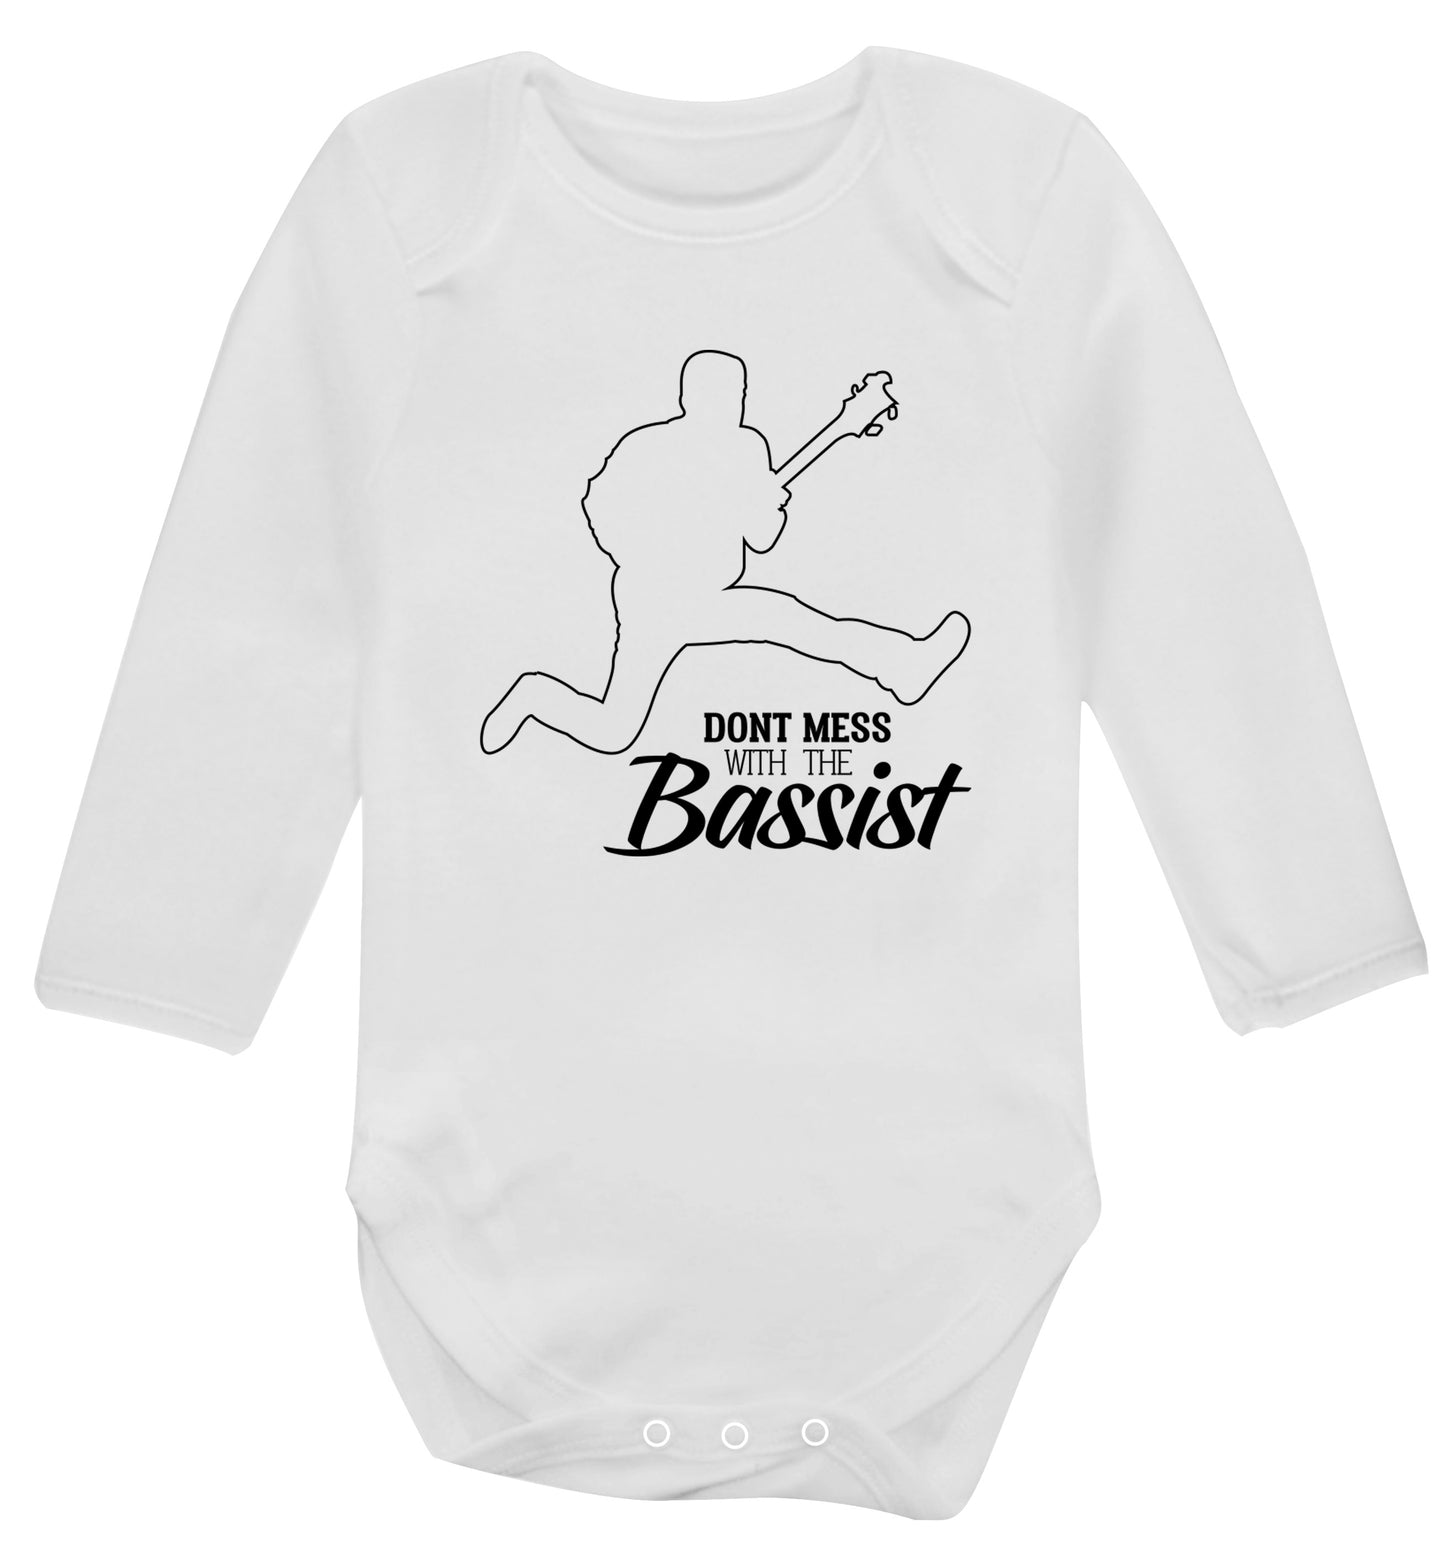 Dont mess with the bassist Baby Vest long sleeved white 6-12 months